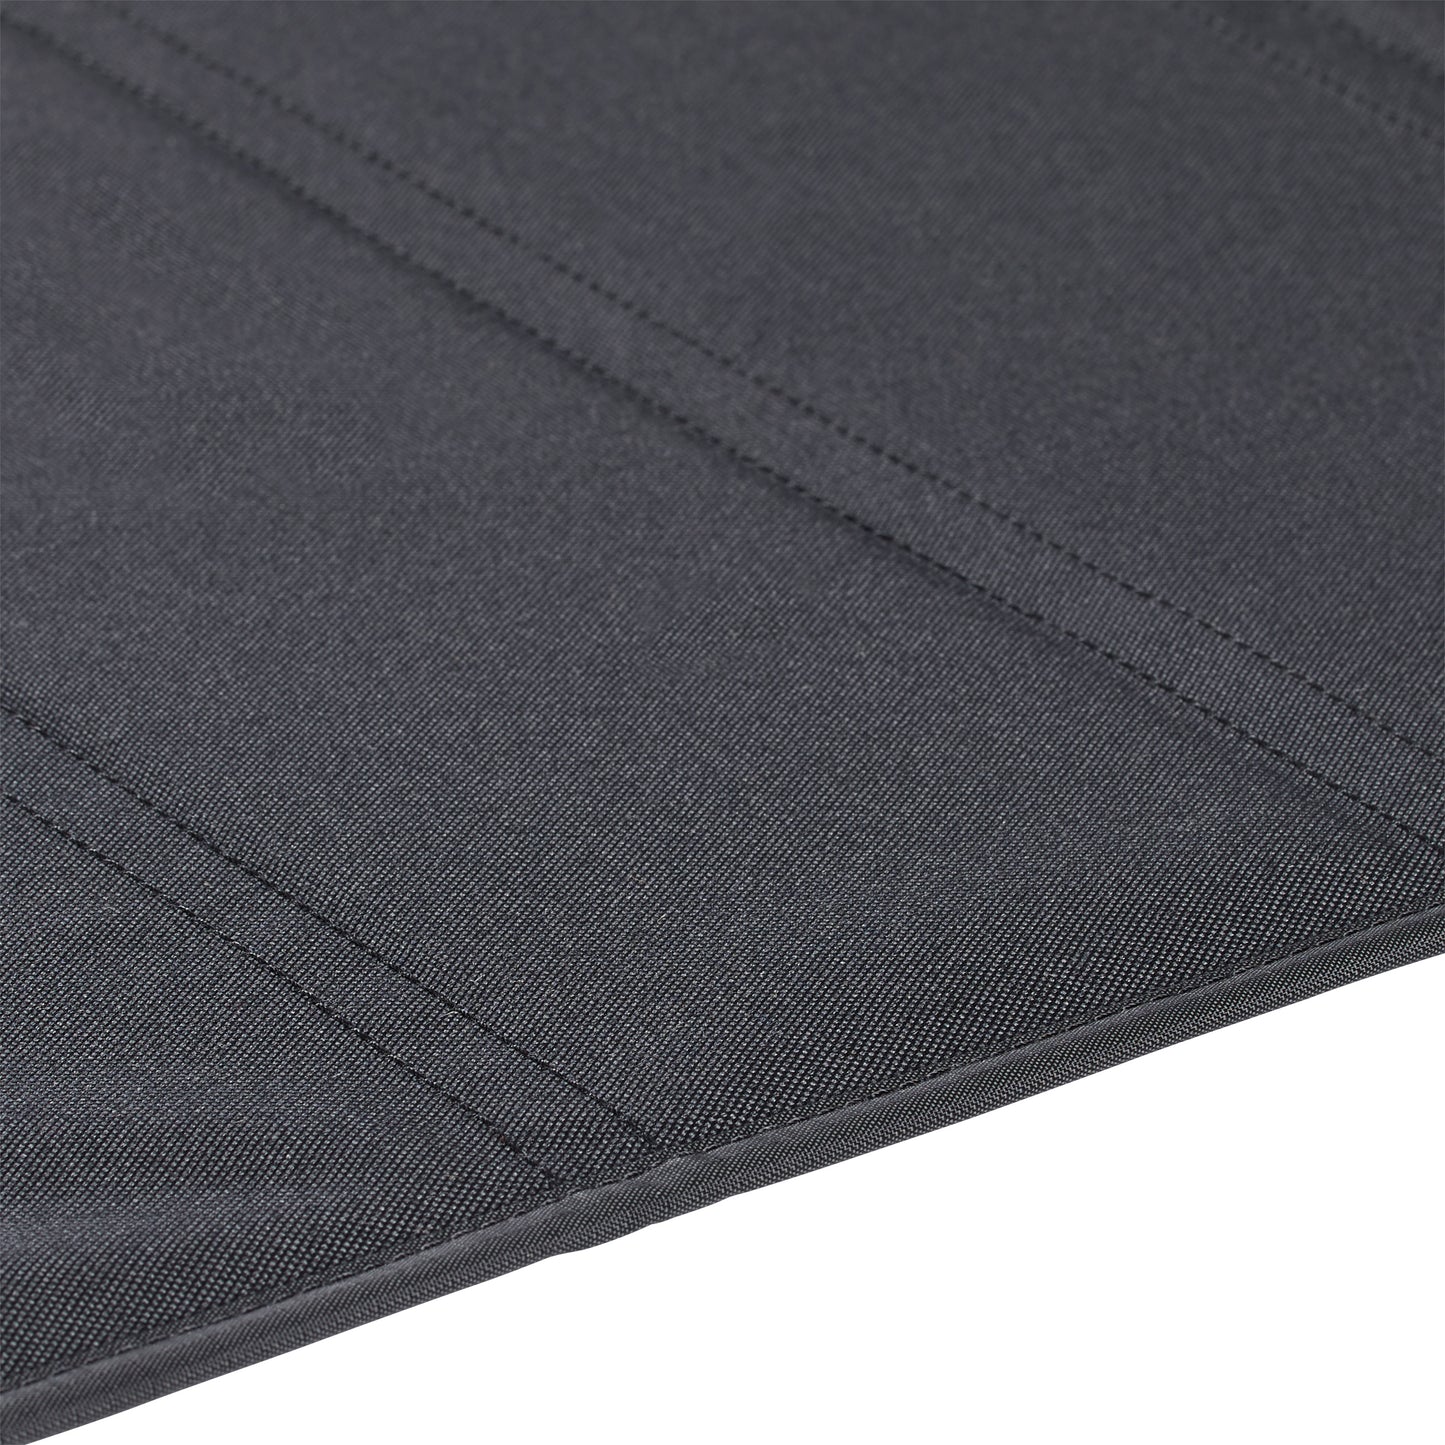 Table One Hard Top - Black